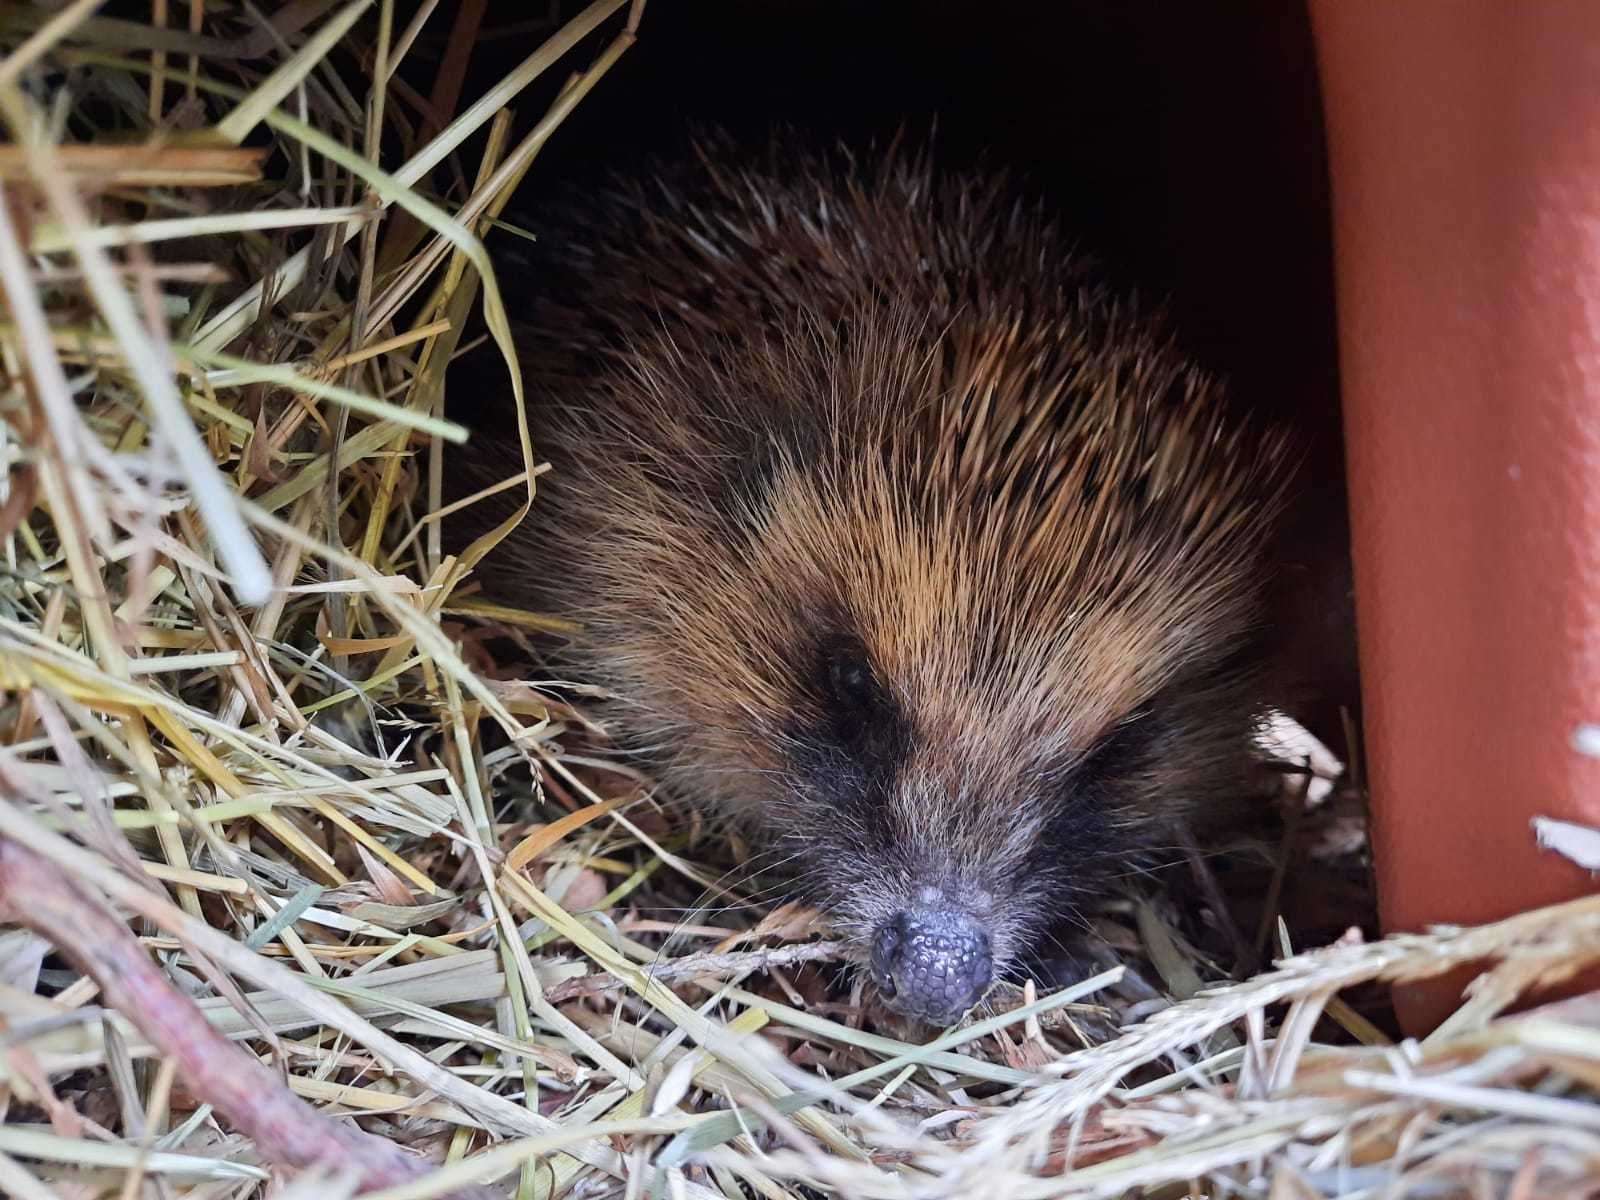 Can you help hedgehogs like this?